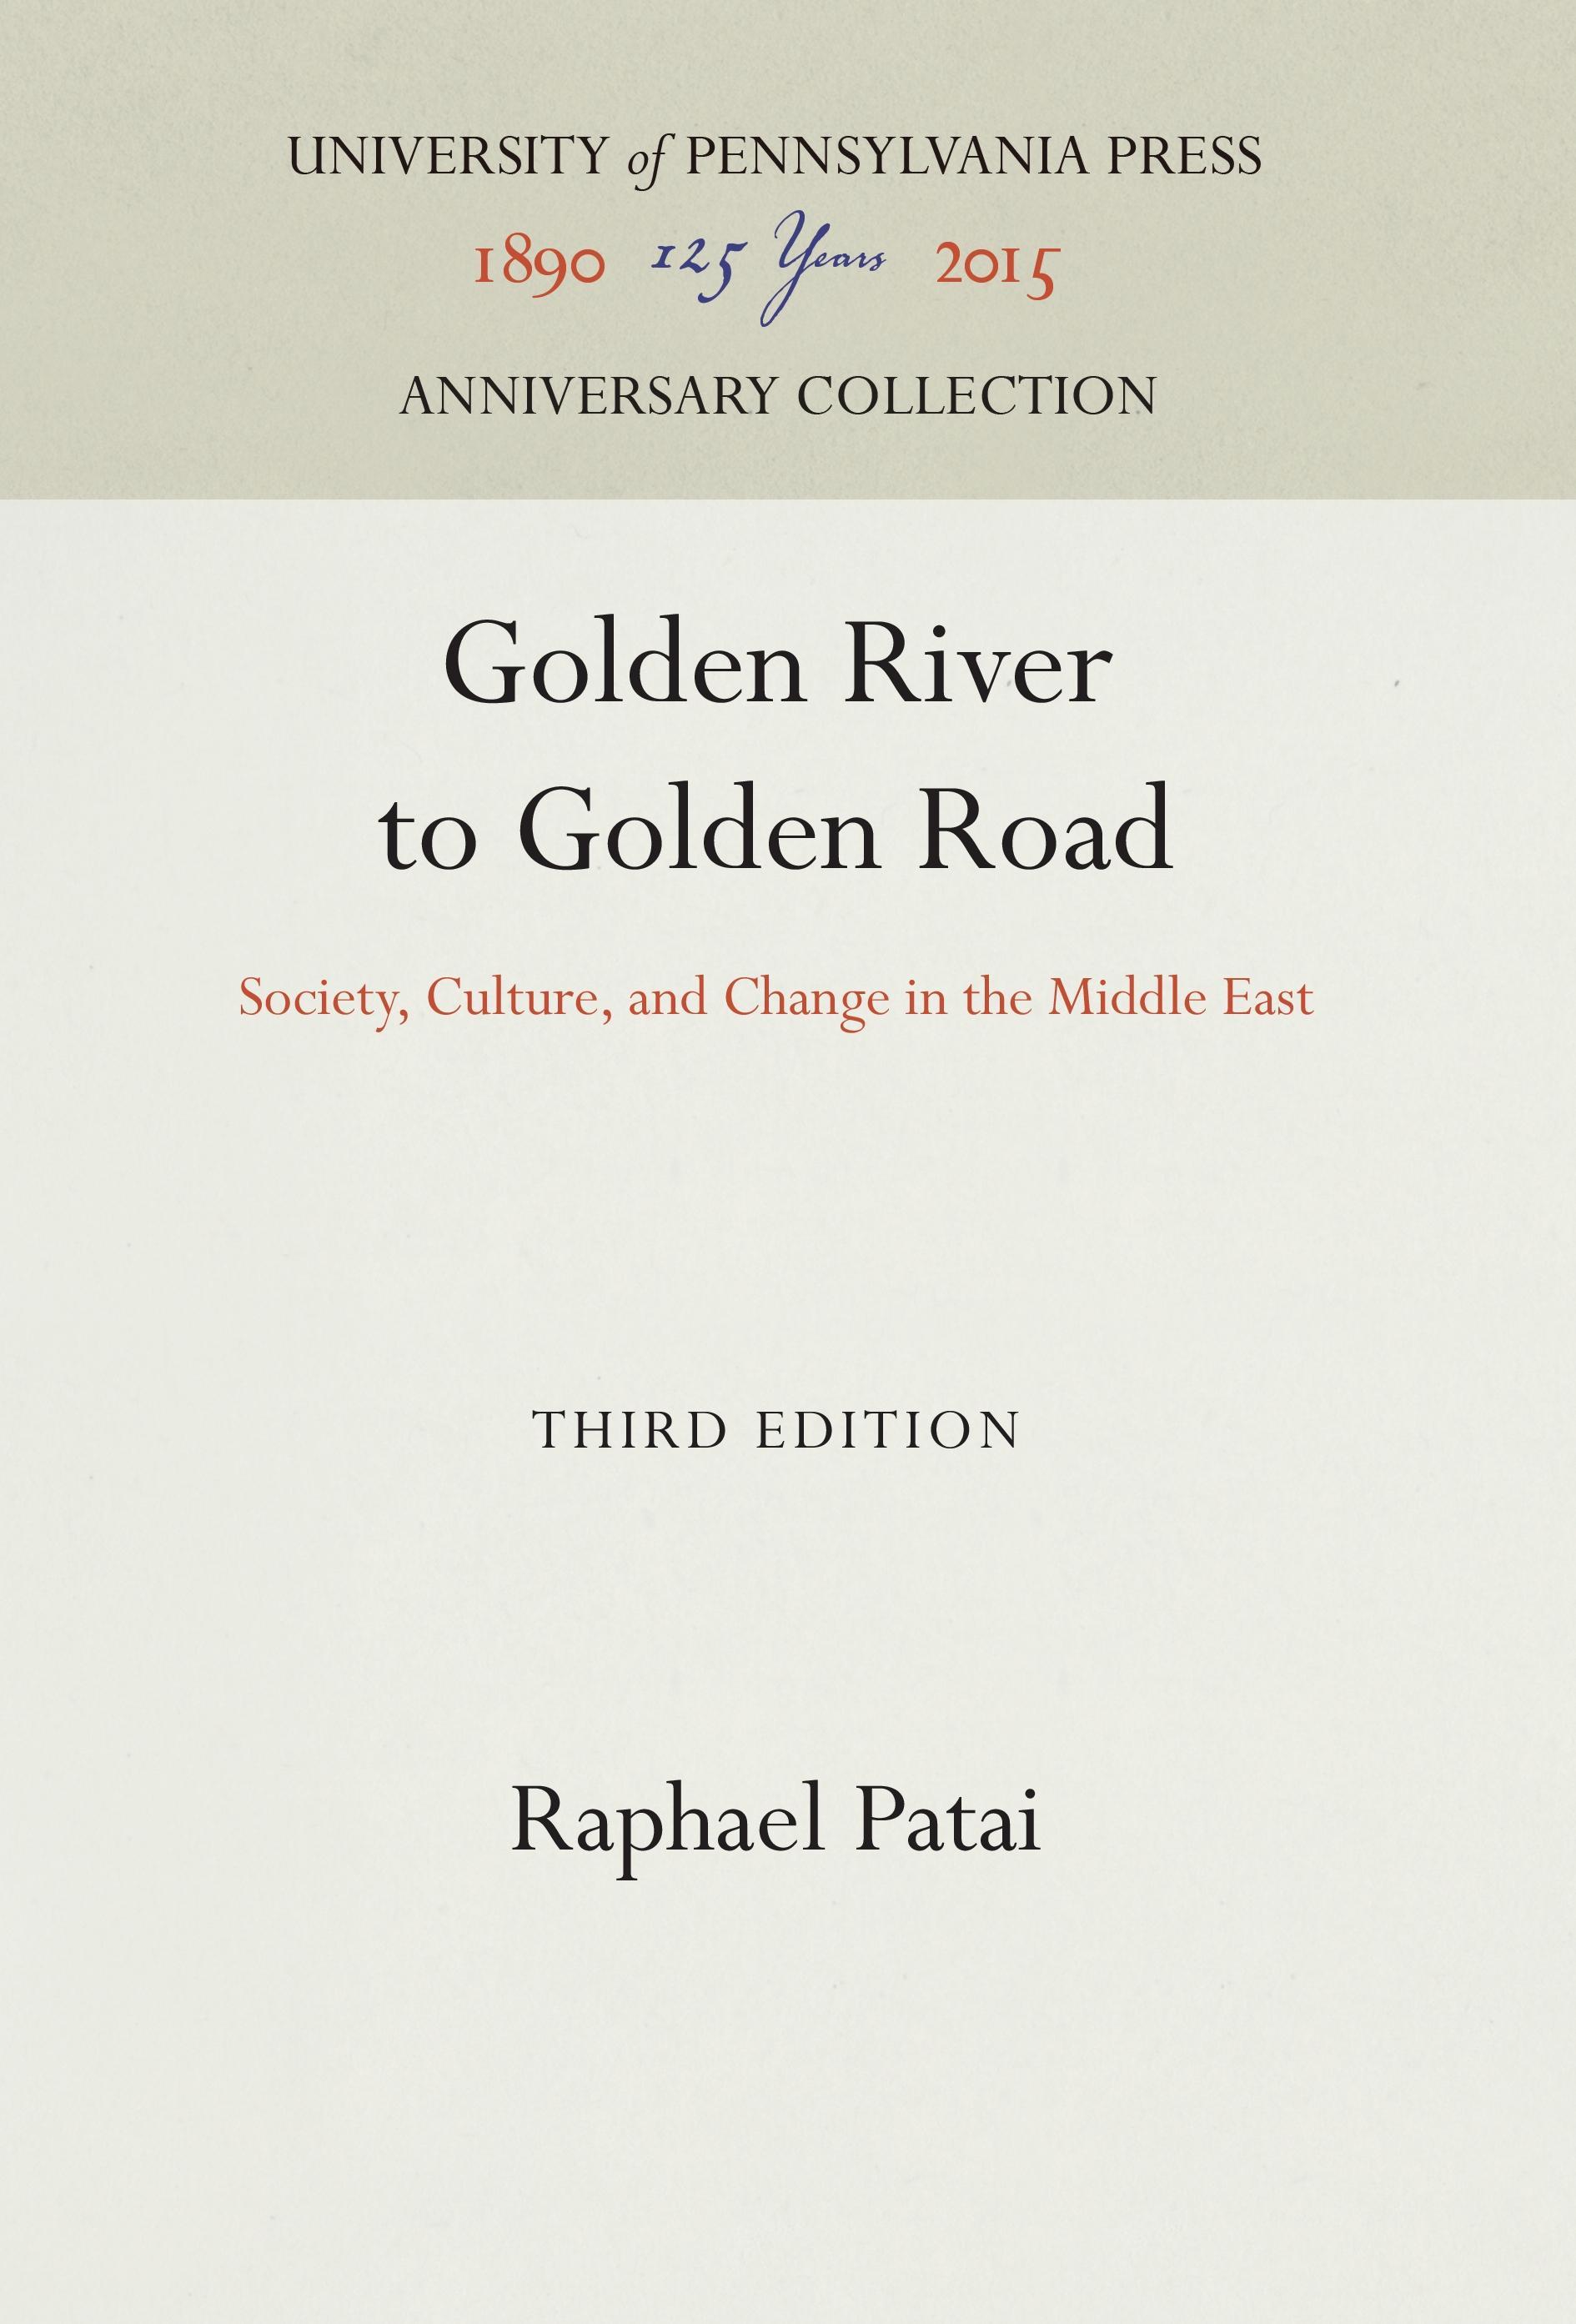 Golden River to Golden Road / Society, Culture, and Change in the Middle East / Raphael Patai / Buch / Englisch / UNIV PENN PR ANNIVERSARY COLLE / EAN 9780812272895 - Patai, Raphael